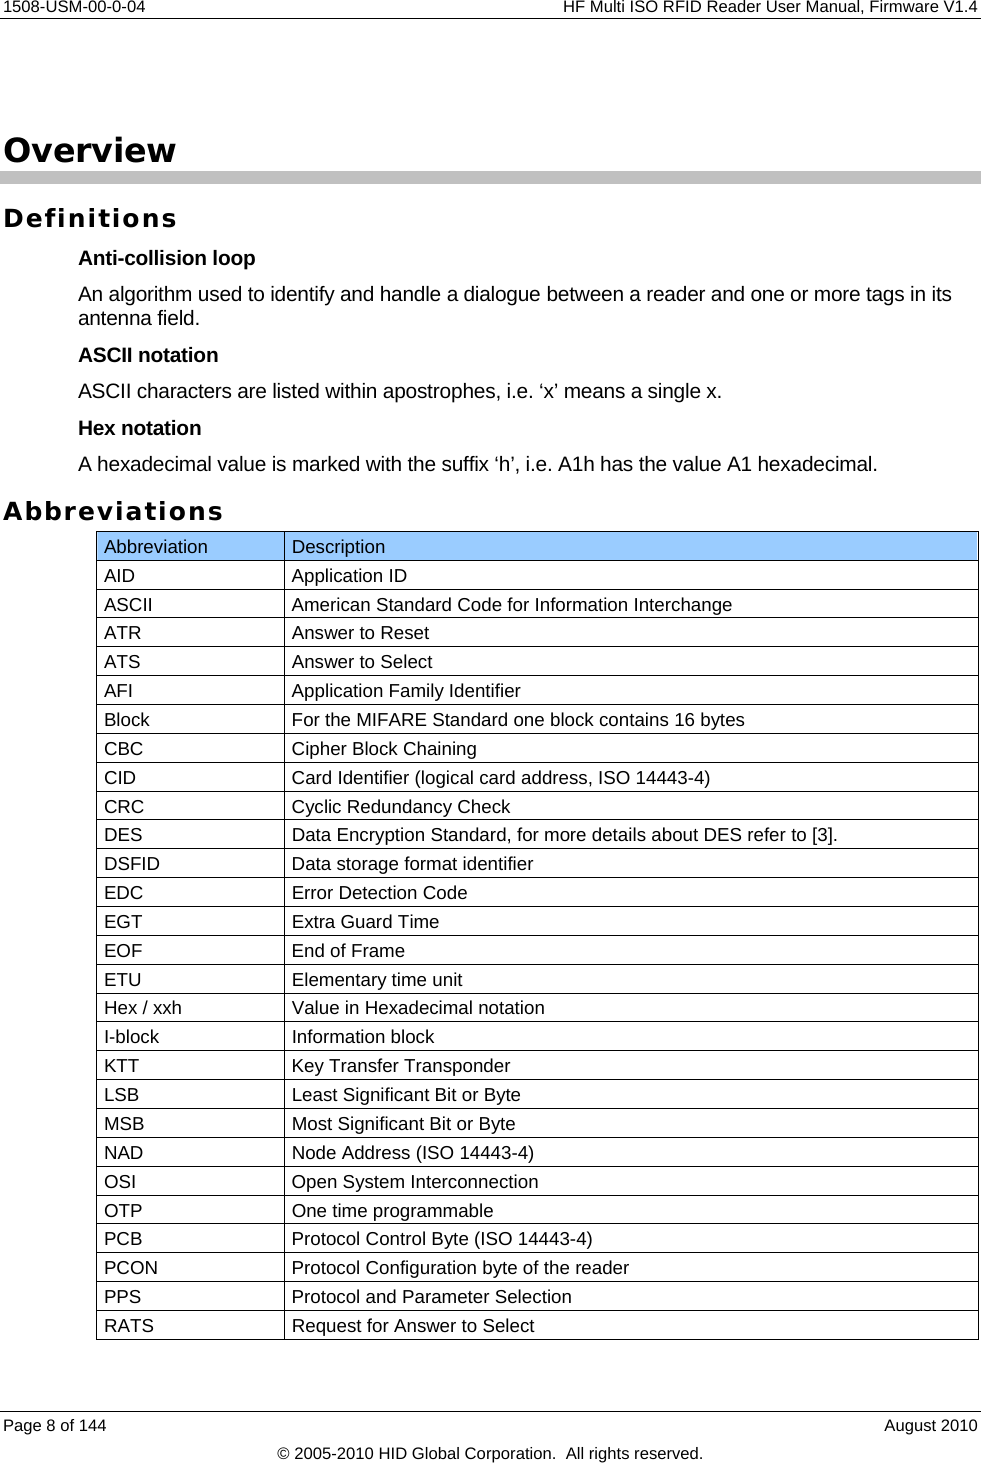     1508-USM-00-0-04    HF Multi ISO RFID Reader User Manual, Firmware V1.4  Overview Definitions Anti-collision loop An algorithm used to identify and handle a dialogue between a reader and one or more tags in its antenna field. ASCII notation ASCII characters are listed within apostrophes, i.e. ‘x’ means a single x. Hex notation A hexadecimal value is marked with the suffix ‘h’, i.e. A1h has the value A1 hexadecimal. Abbreviations Abbreviation  Description AID Application ID ASCII  American Standard Code for Information Interchange ATR  Answer to Reset ATS  Answer to Select AFI  Application Family Identifier Block  For the MIFARE Standard one block contains 16 bytes CBC  Cipher Block Chaining CID  Card Identifier (logical card address, ISO 14443-4) CRC  Cyclic Redundancy Check DES  Data Encryption Standard, for more details about DES refer to [3]. DSFID  Data storage format identifier EDC  Error Detection Code EGT  Extra Guard Time EOF  End of Frame ETU  Elementary time unit Hex / xxh  Value in Hexadecimal notation I-block Information block KTT  Key Transfer Transponder LSB  Least Significant Bit or Byte MSB  Most Significant Bit or Byte NAD  Node Address (ISO 14443-4) OSI  Open System Interconnection OTP  One time programmable PCB  Protocol Control Byte (ISO 14443-4) PCON  Protocol Configuration byte of the reader PPS  Protocol and Parameter Selection RATS  Request for Answer to Select Page 8 of 144    August 2010 © 2005-2010 HID Global Corporation.  All rights reserved. 